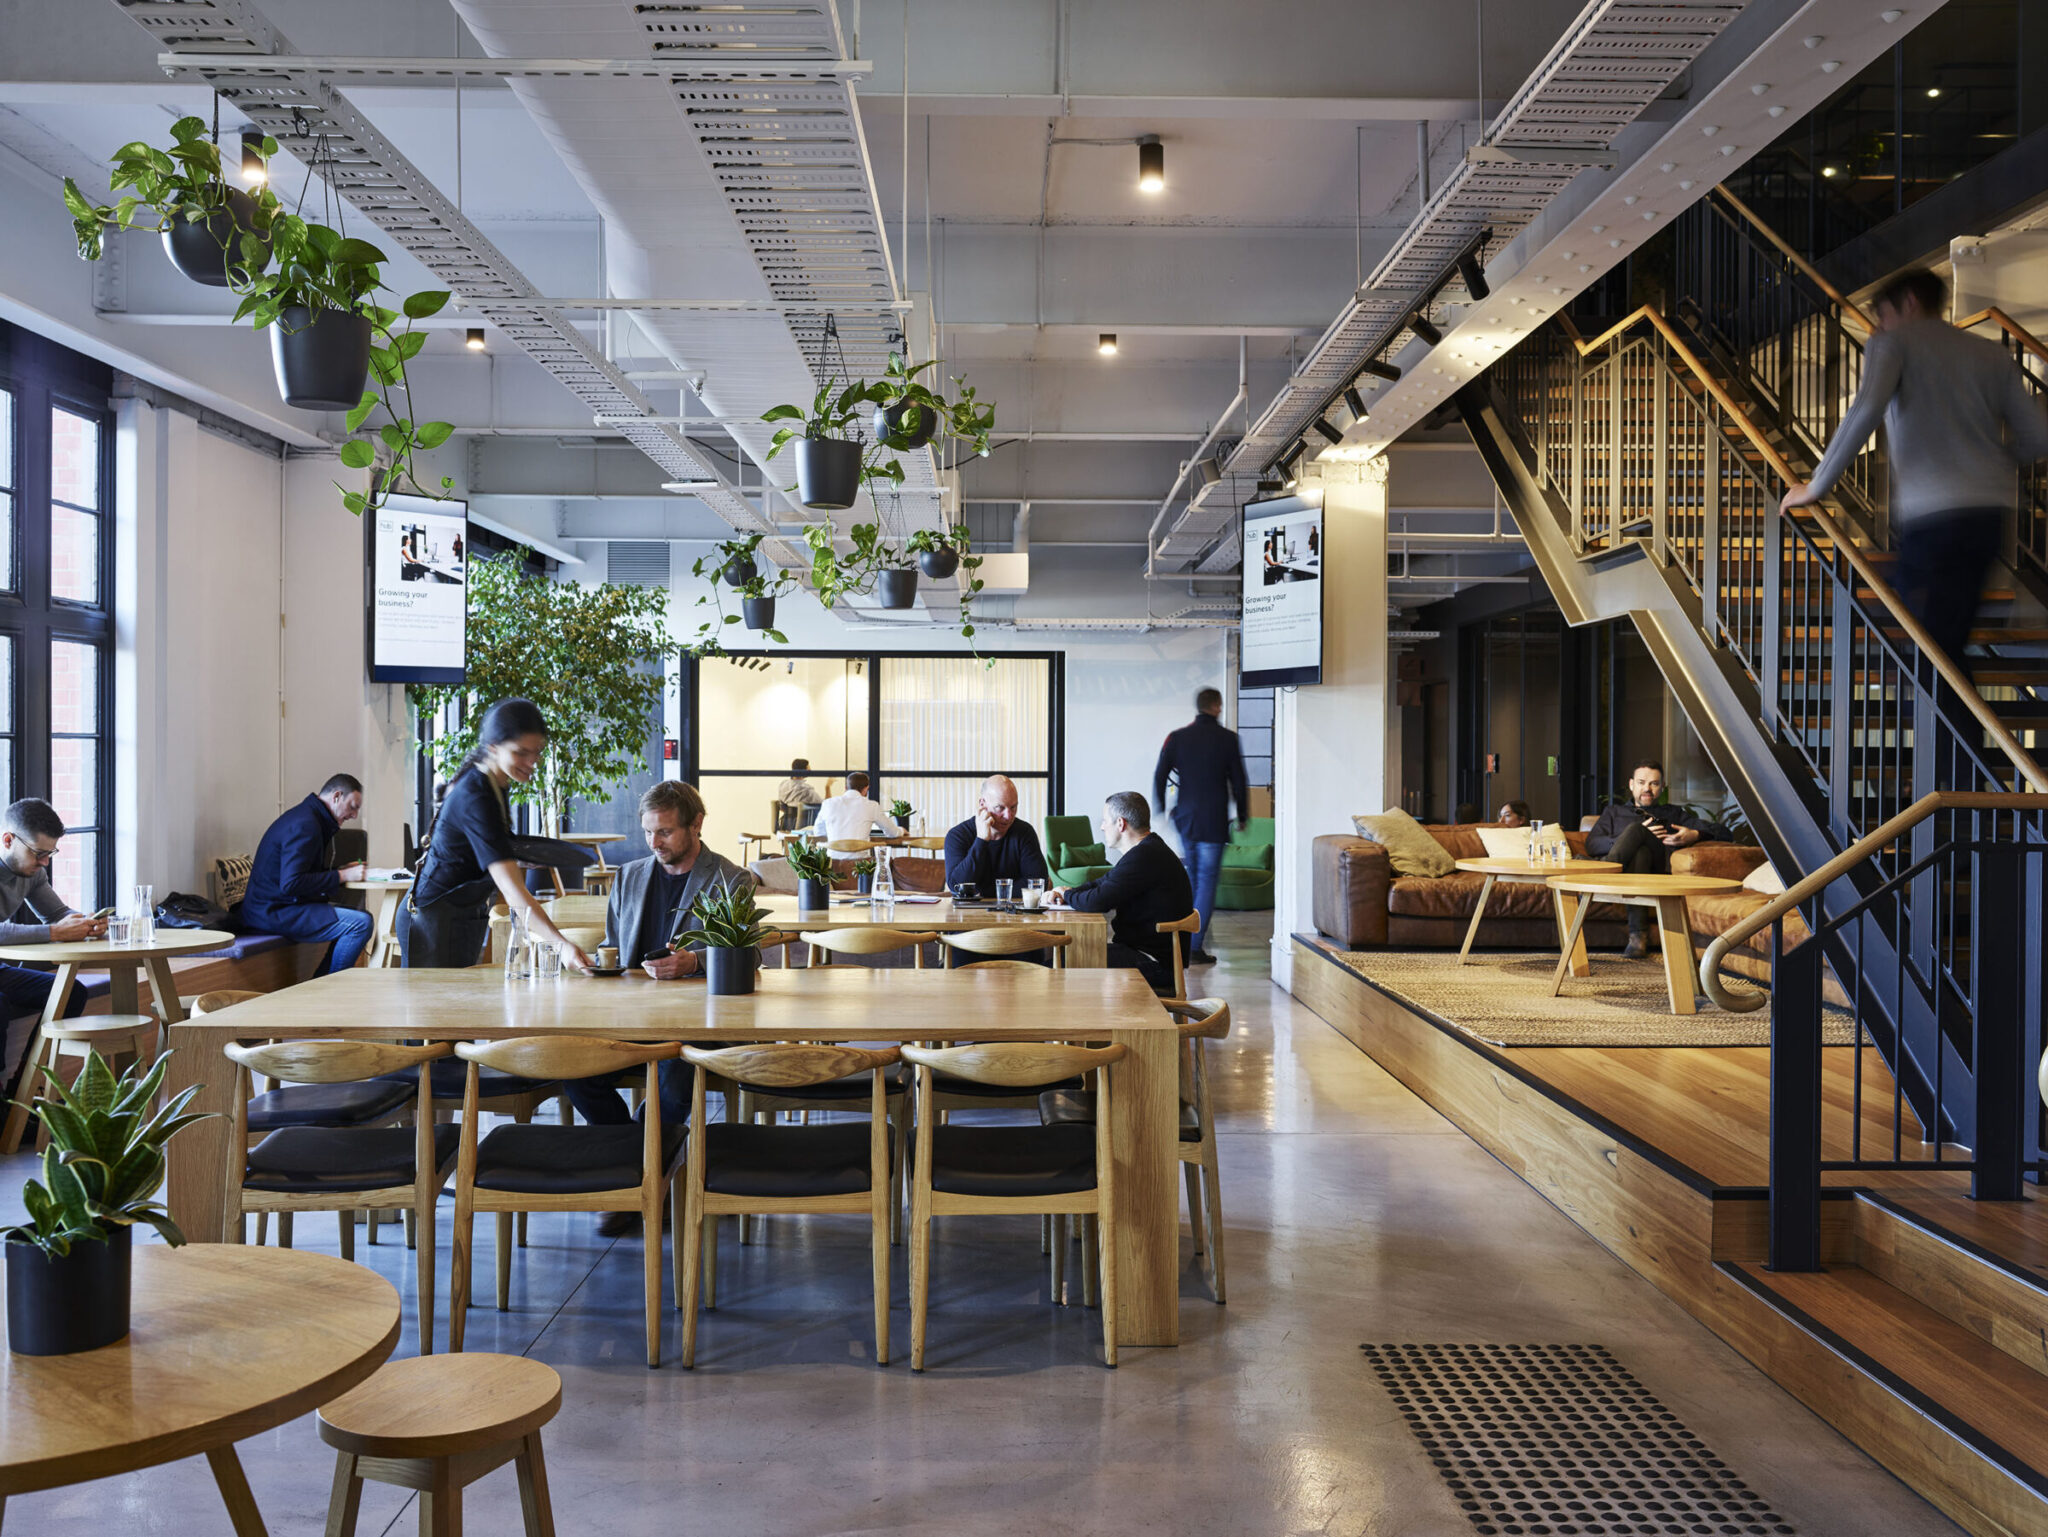 cafe space filled with greenery